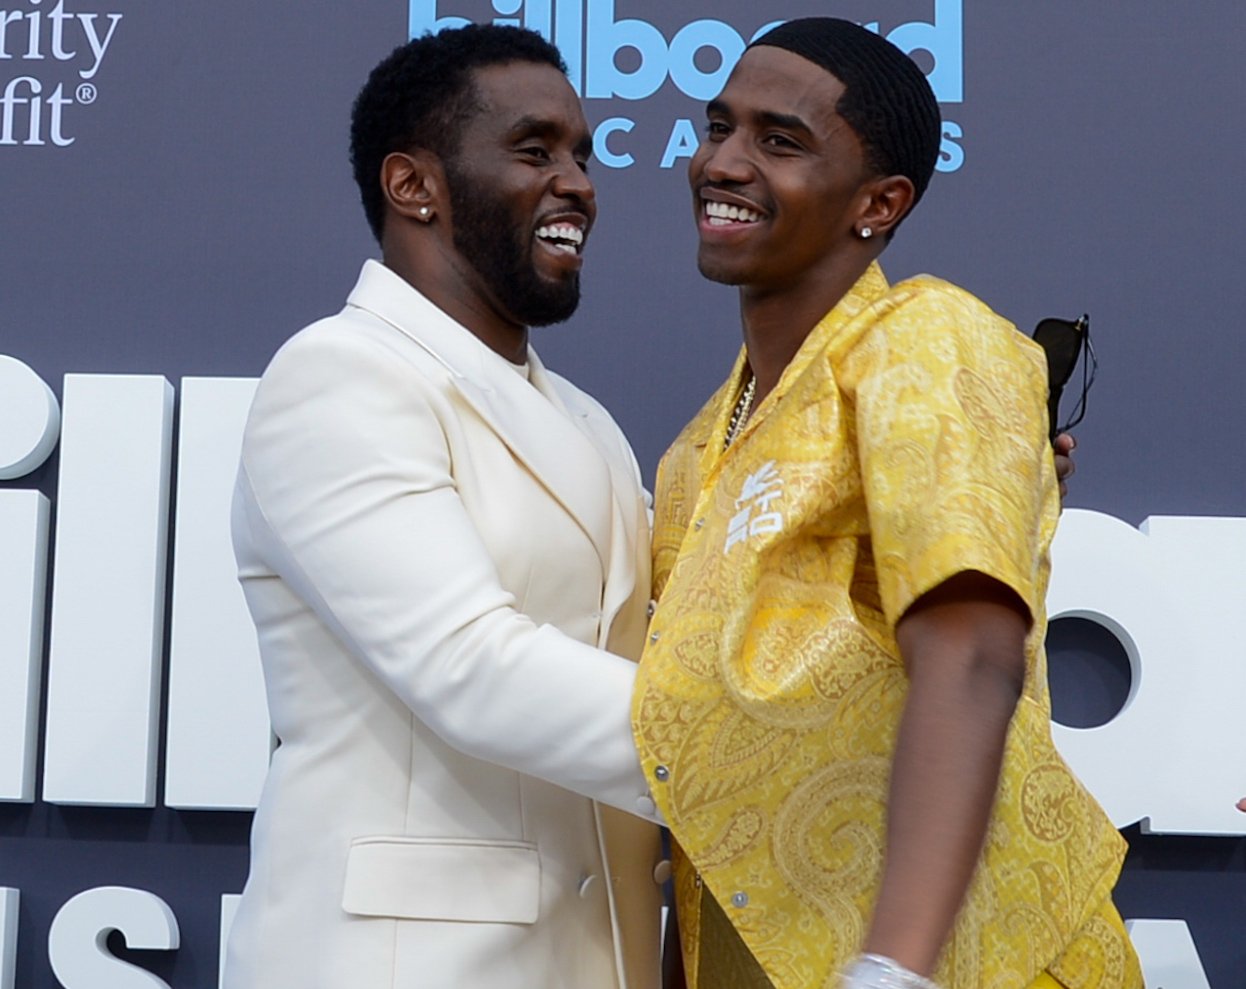 Diddy and King Combs have a moment together on the red carpet; Diddy and King Combs made Billboard chart history